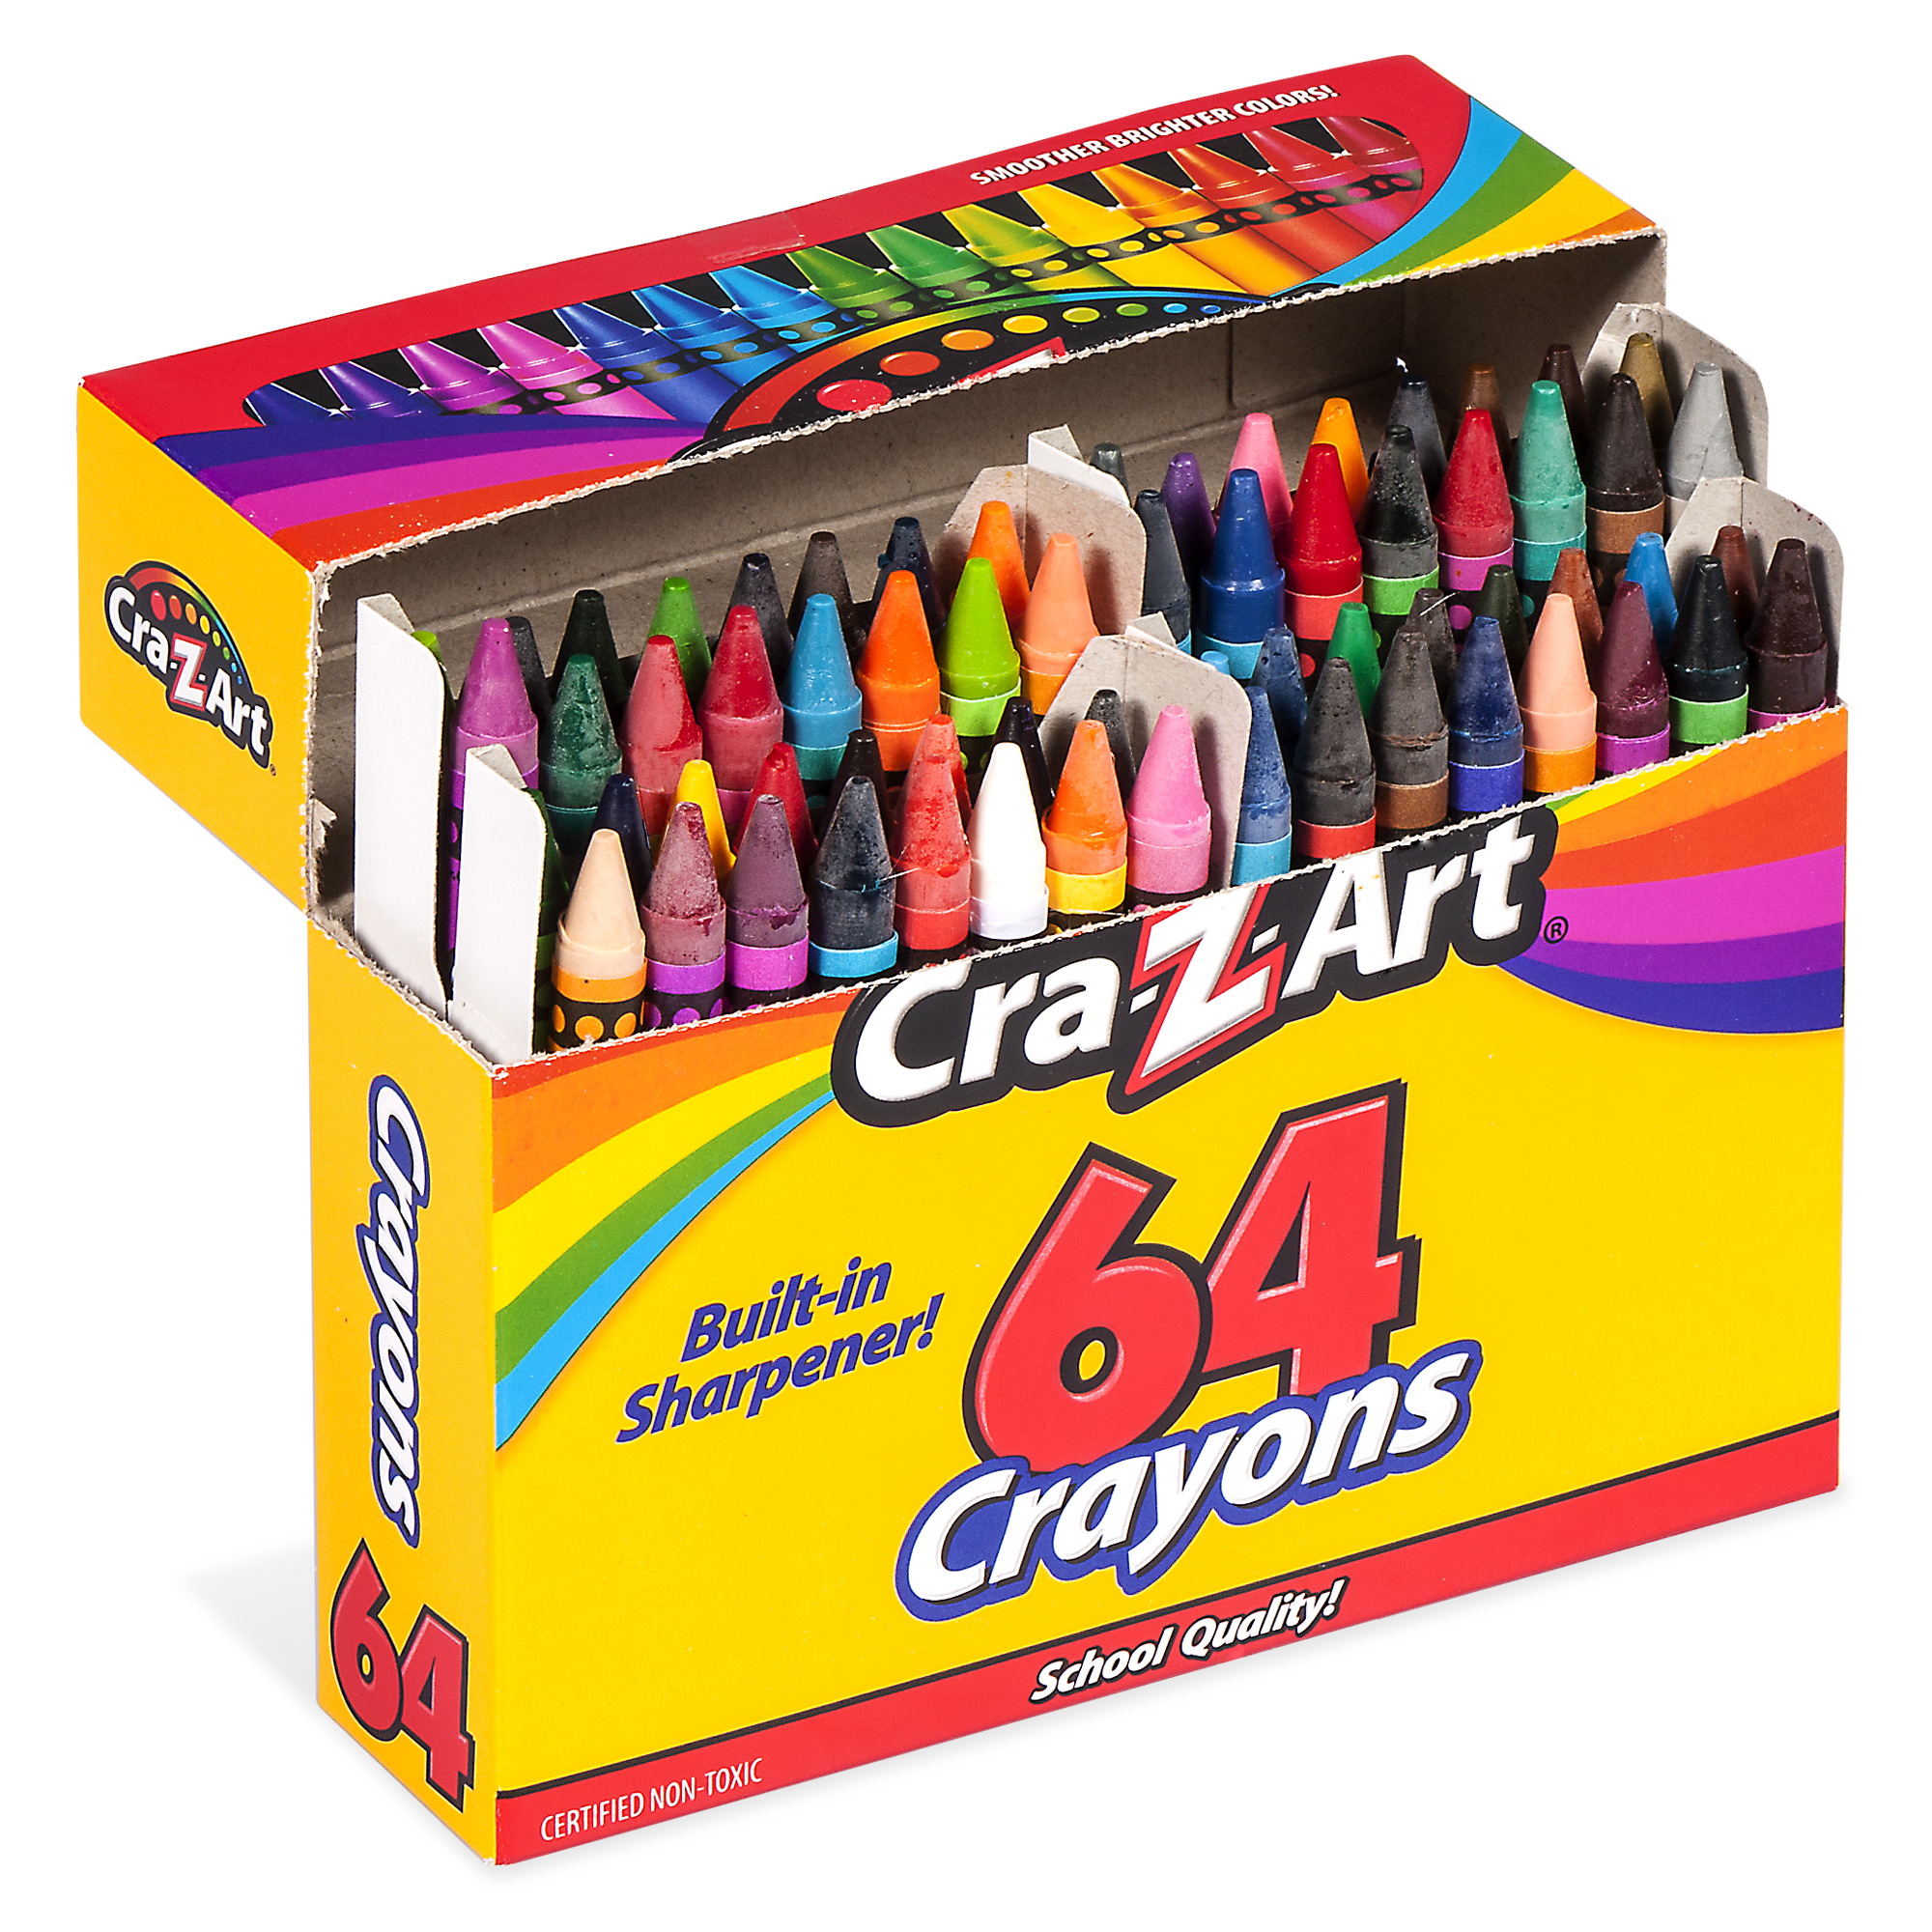 Cra-Z-Art Classic Crayons Multicolor Bulk Pack, 64 Count, Built-in Sharpener, Back to School - image 4 of 9